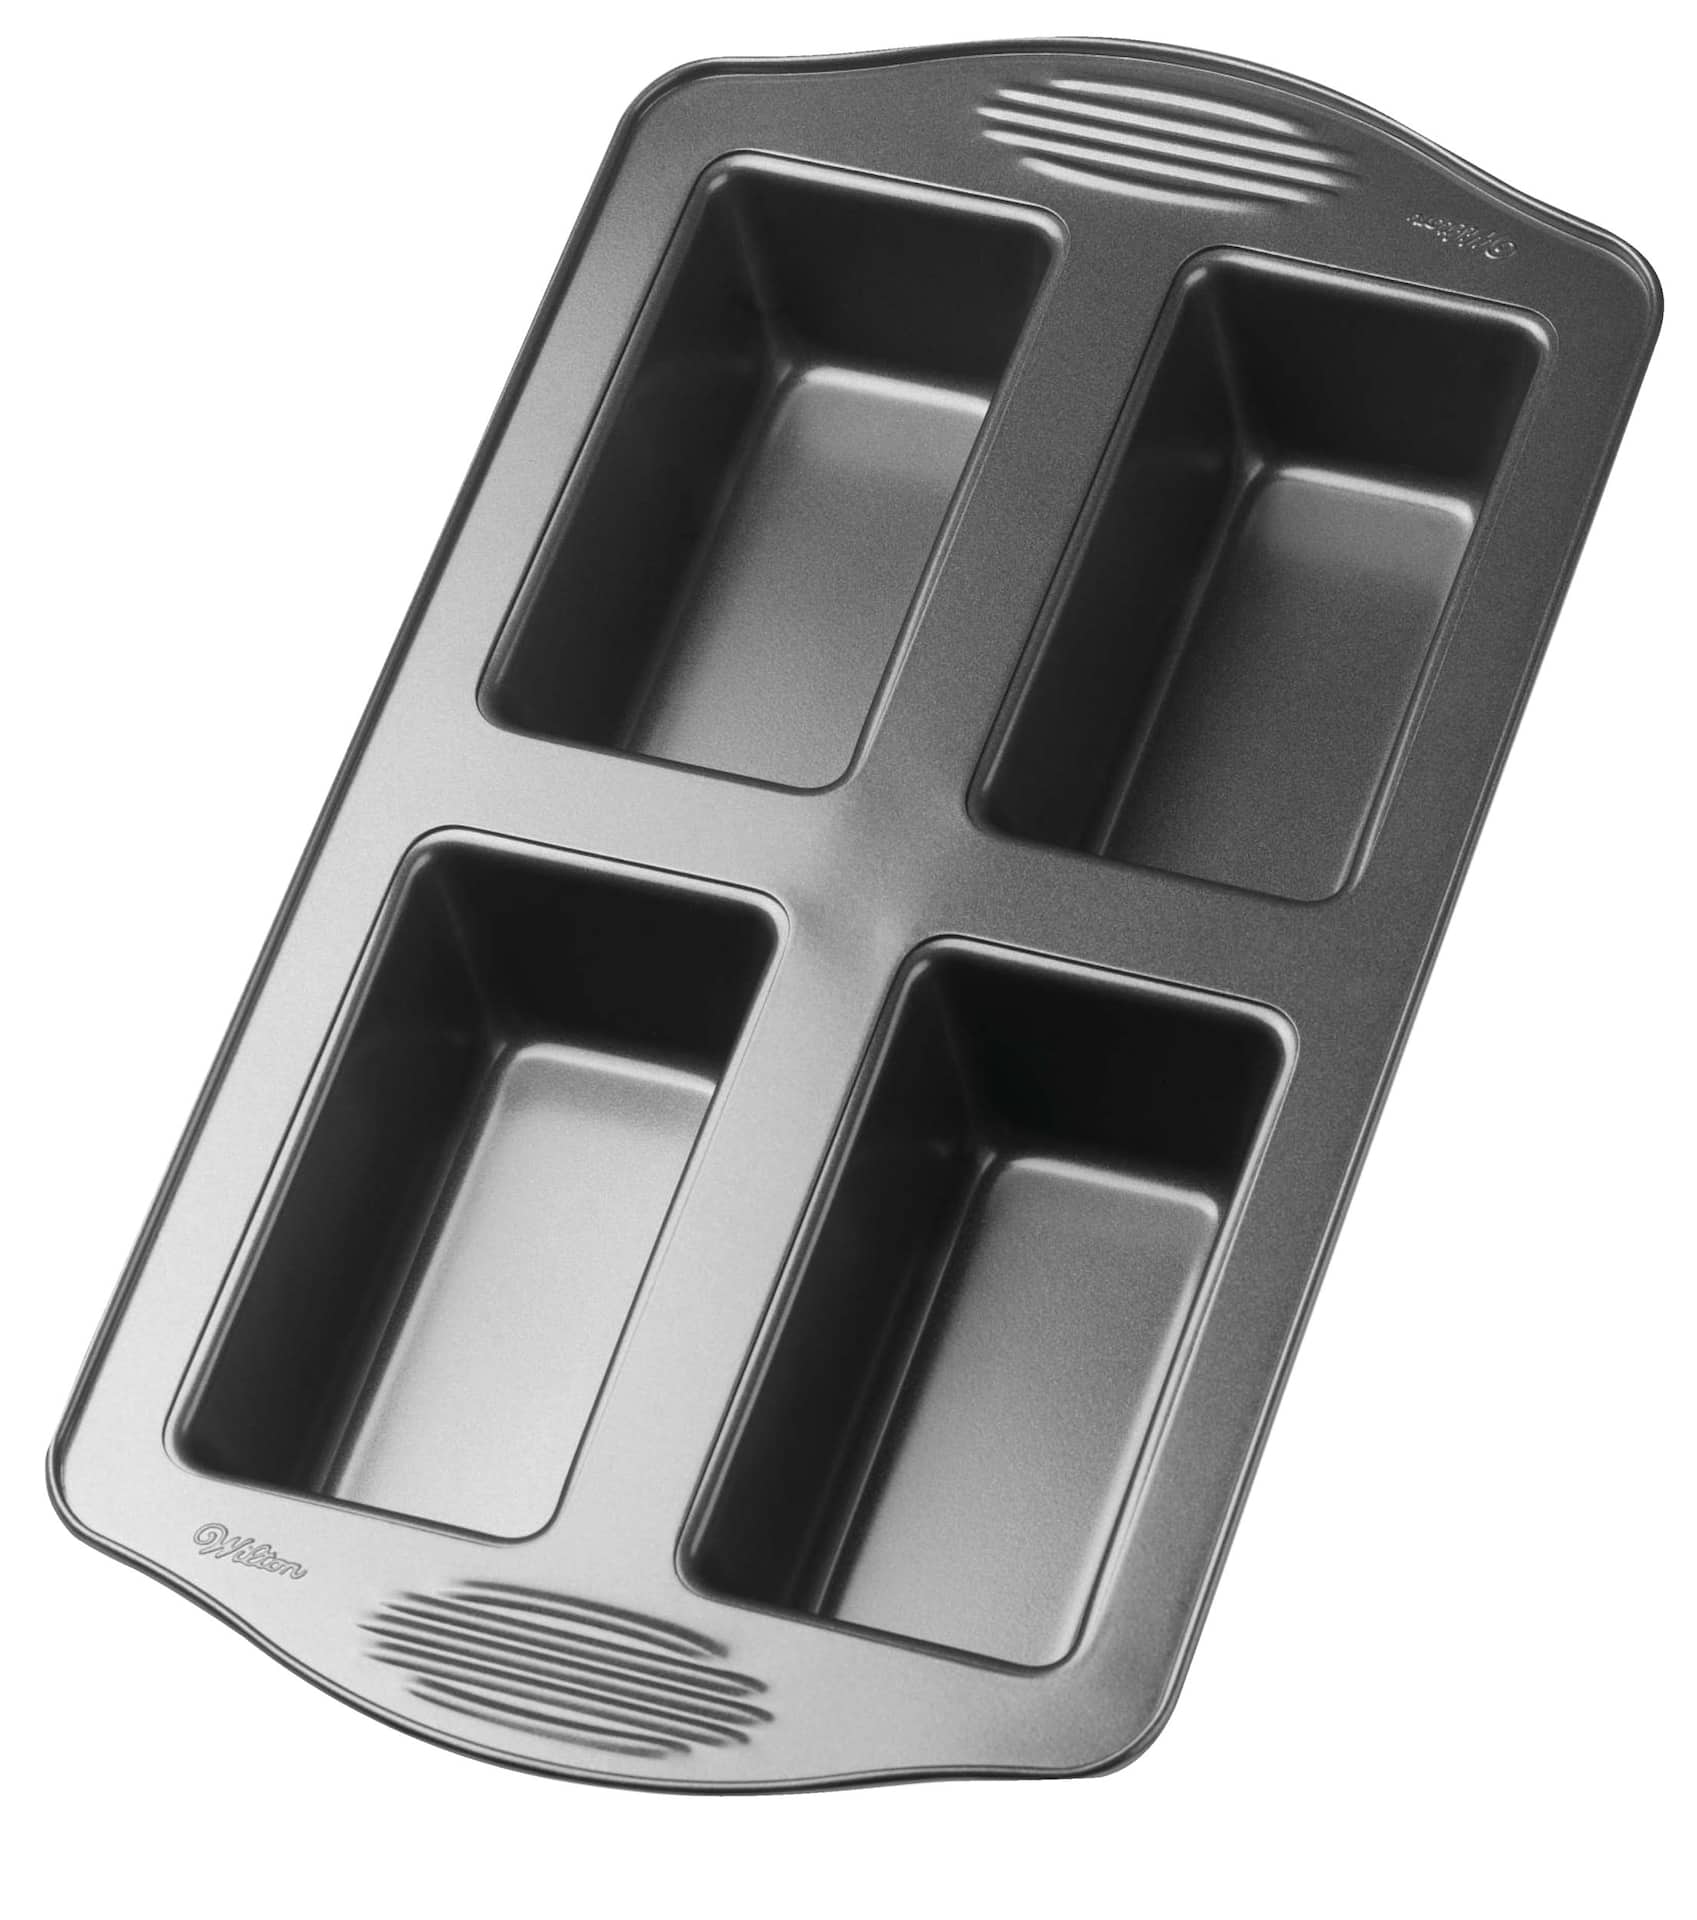 https://media-www.canadiantire.ca/product/living/kitchen/bakeware-baking-prep/1425489/wilton-gourmet-choice-4-cavity-loaf-eec4cbf2-058a-4ece-bb50-5a00ac35ebed-jpgrendition.jpg